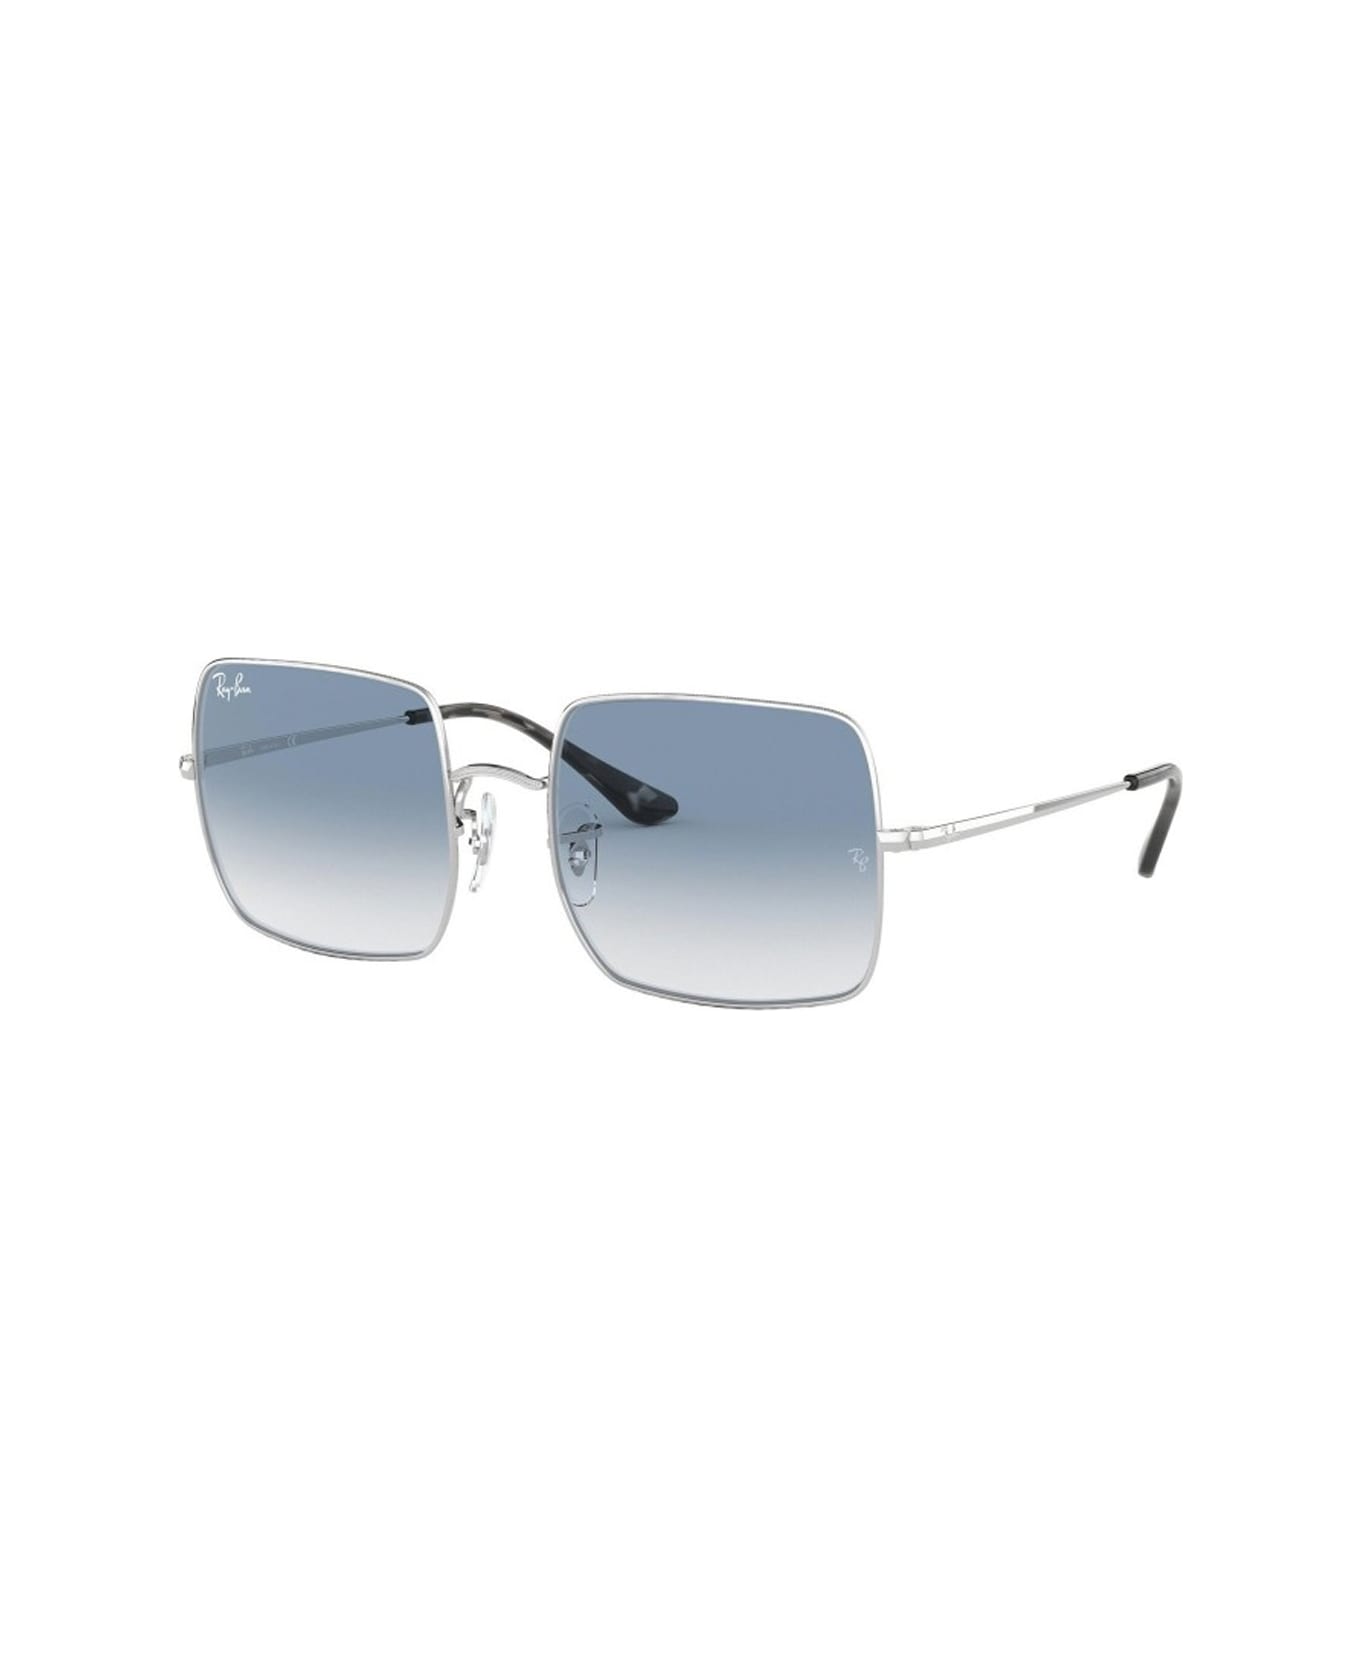 Ray-Ban Square Rb1971 91493f Sunglasses - Argento